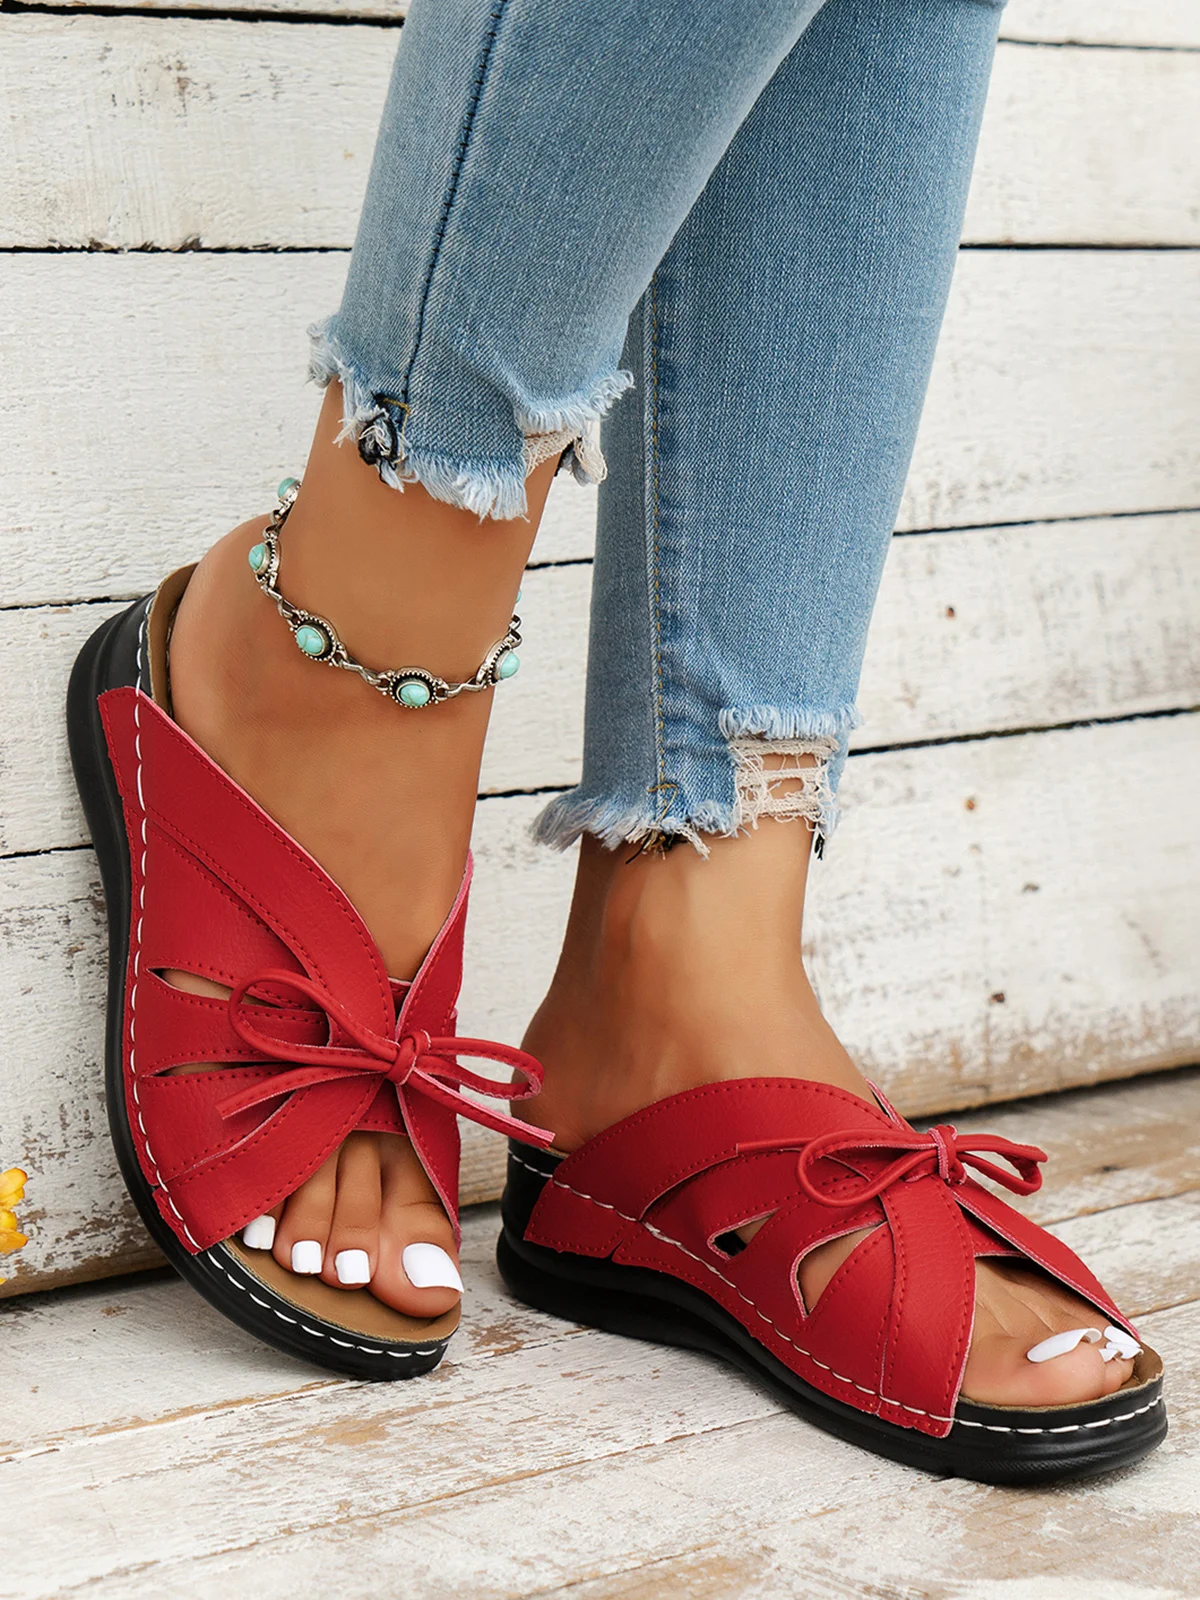 Women's Leisure Sandals Casual Bowknot Hollow out Comfy Wedge Heel Slide Toe-revealing Sandals